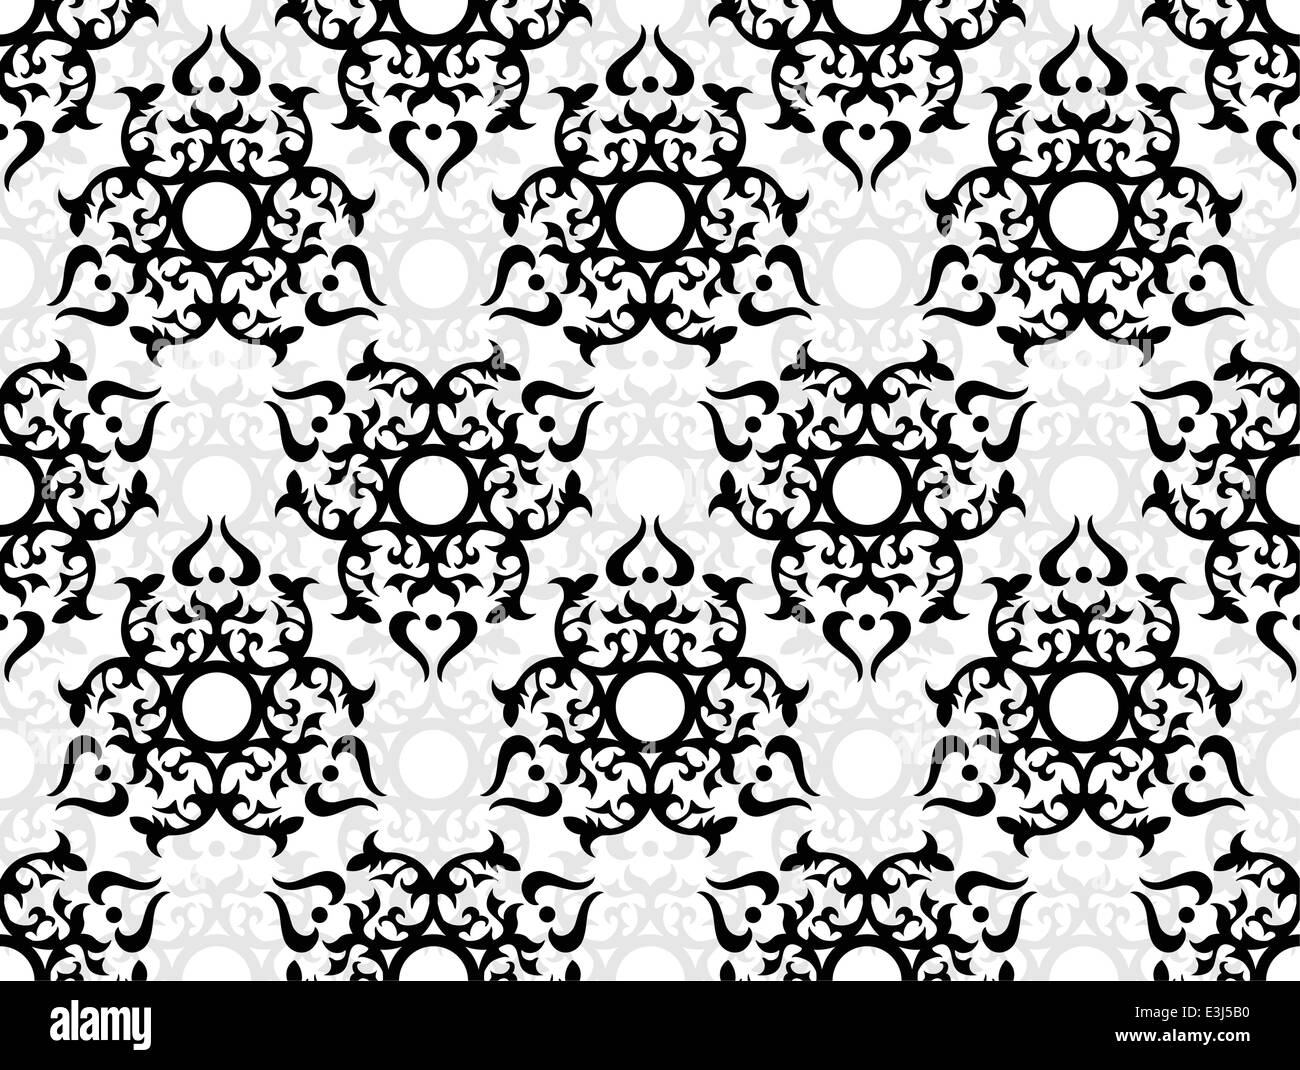 Seamless black and gray tribal background pattern design Stock Vector